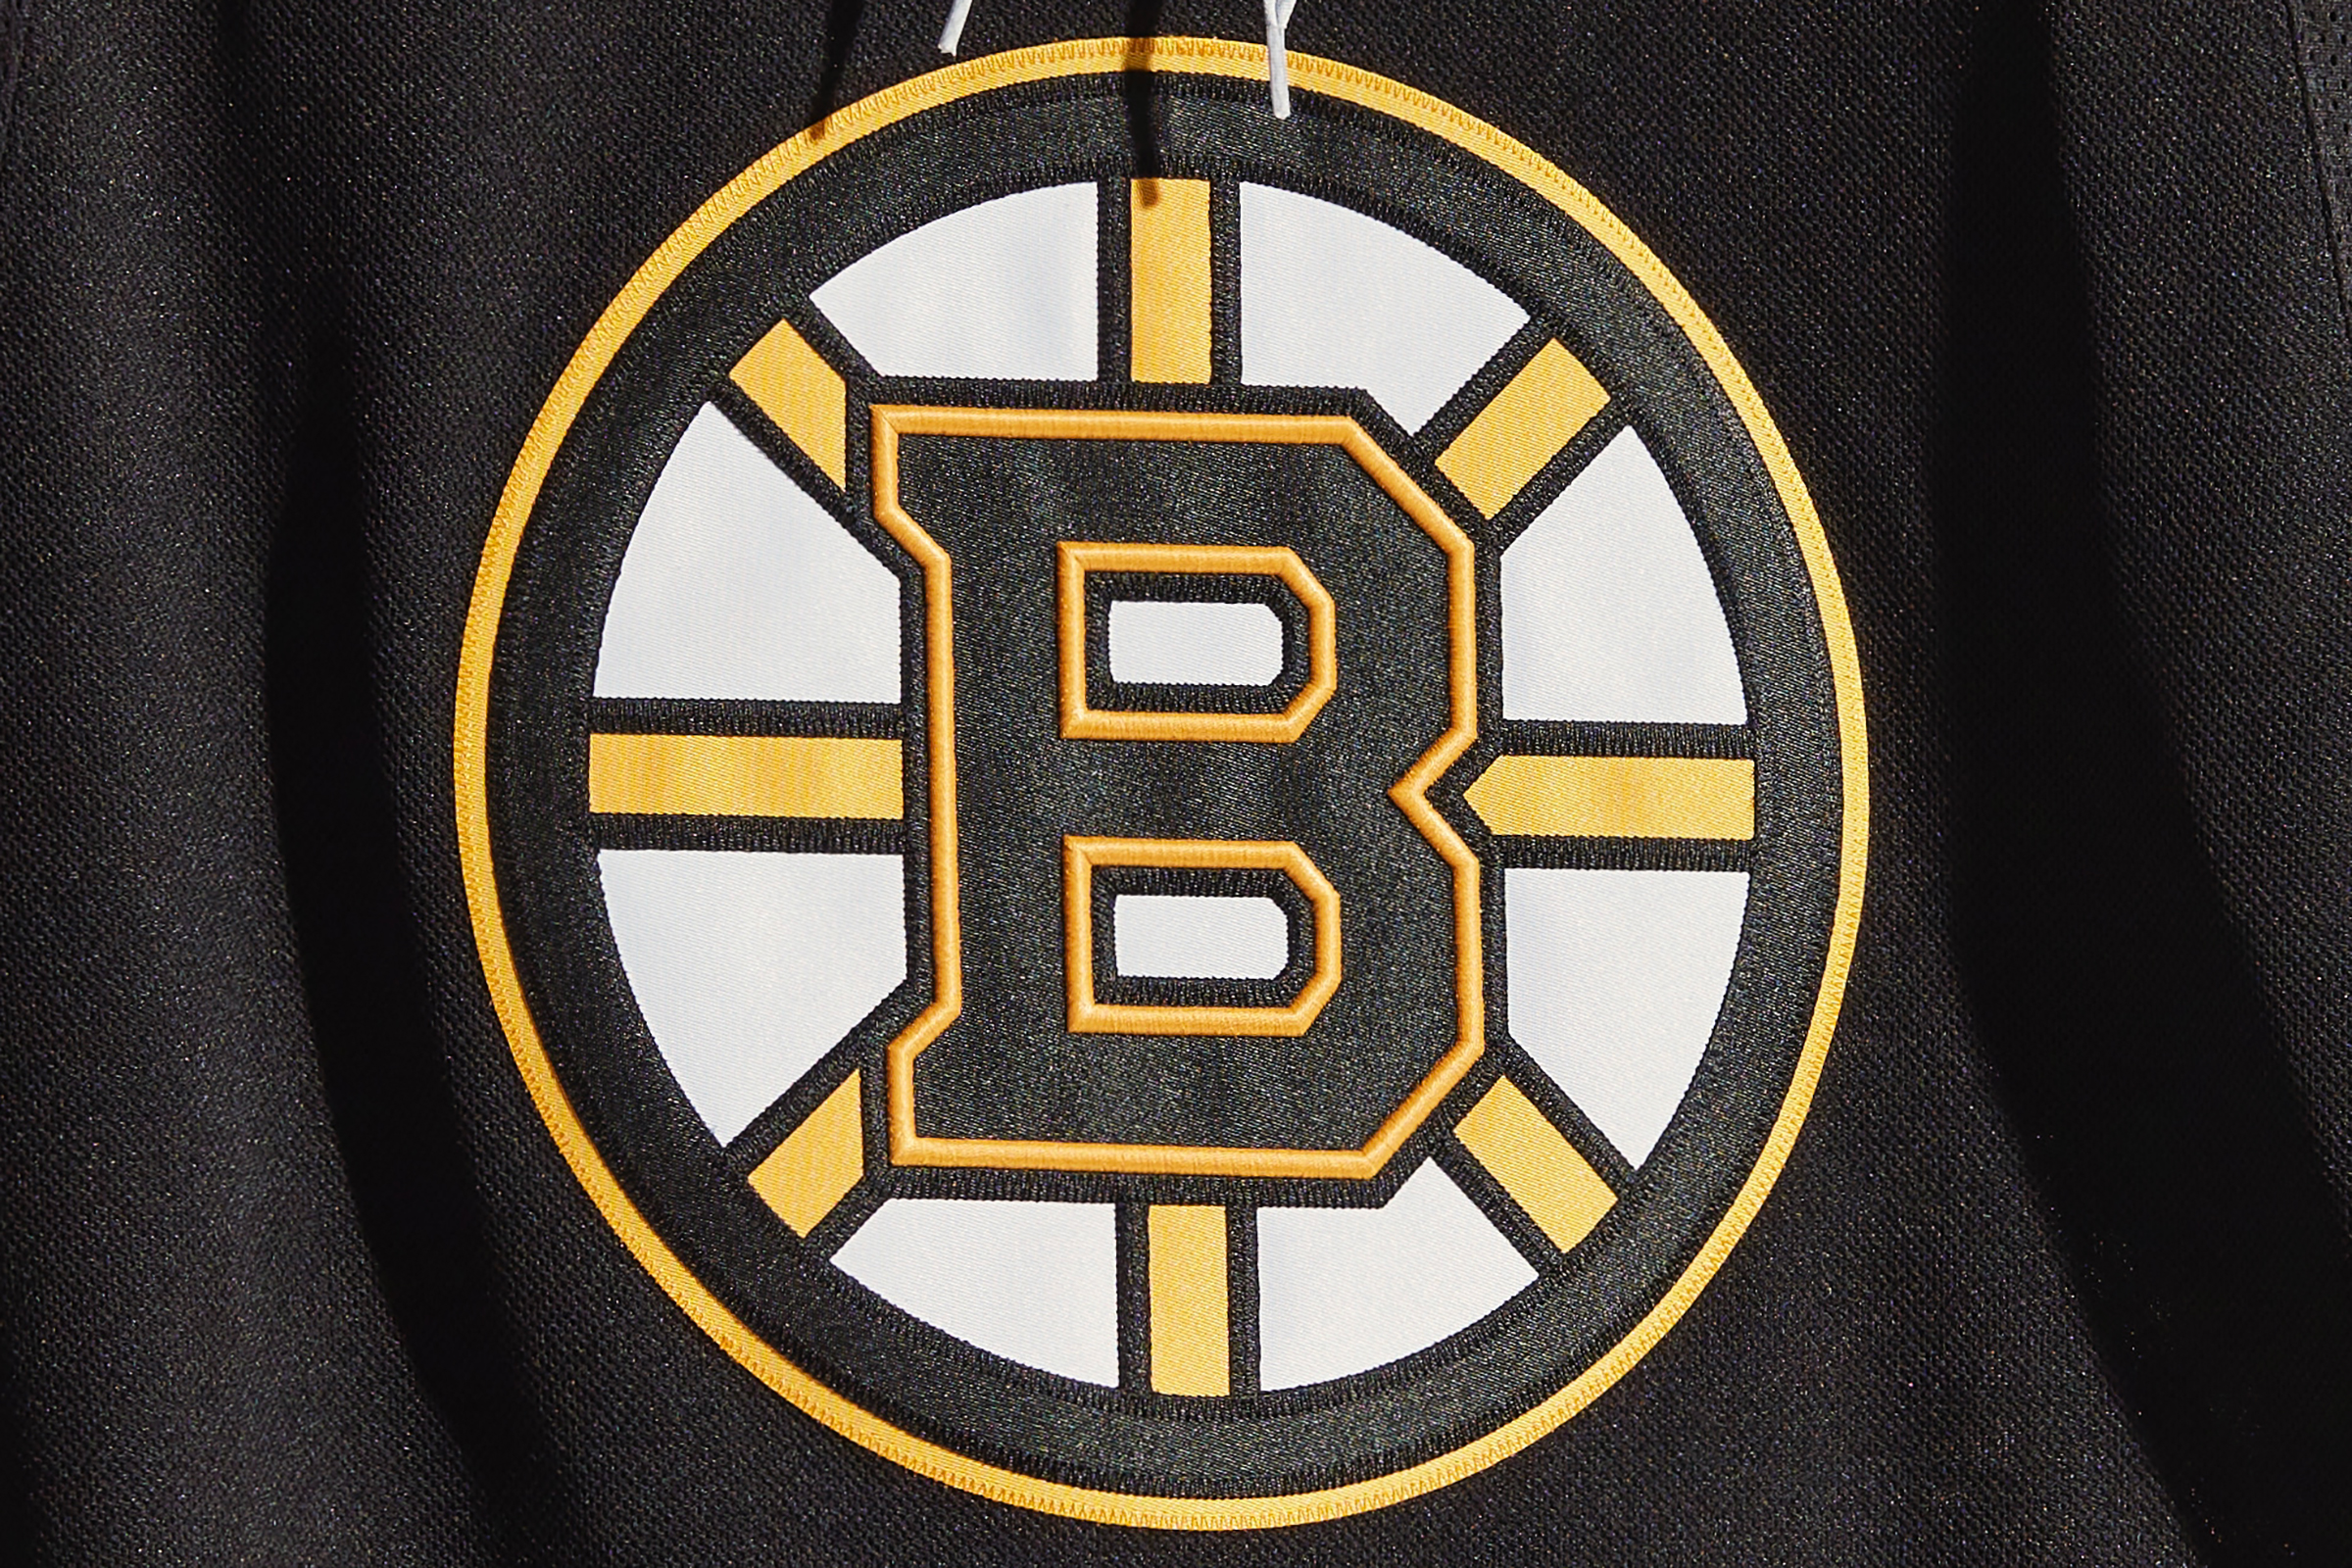 The Bruins' jersey.